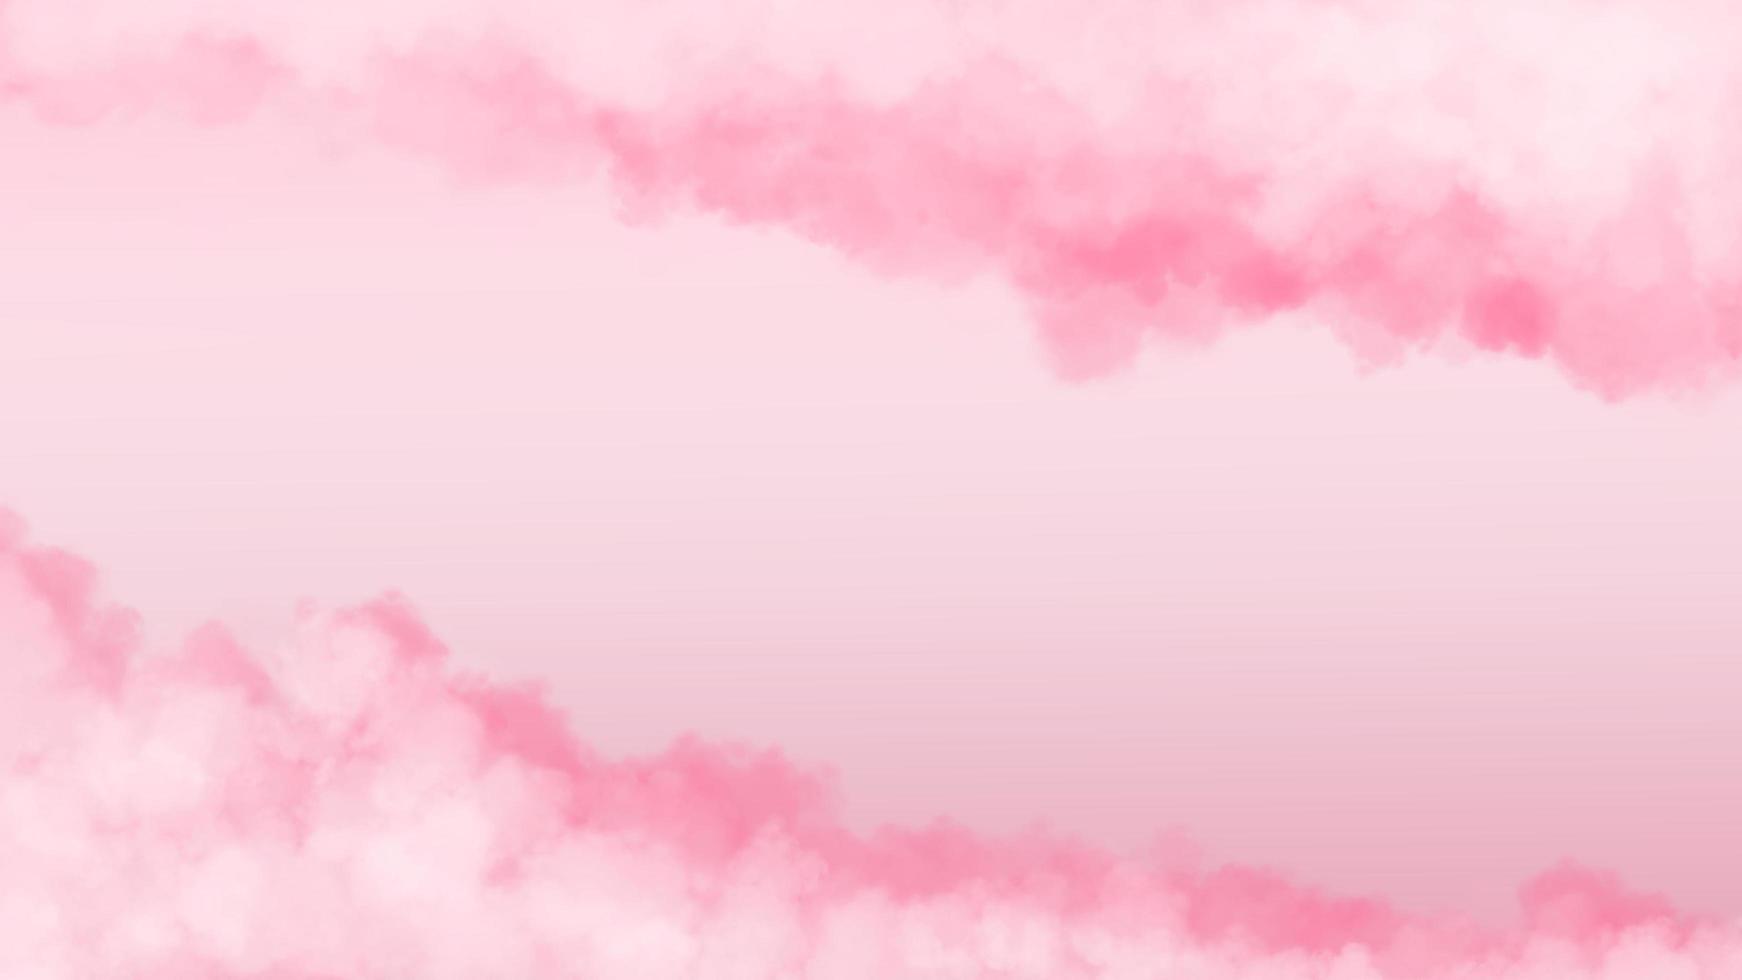 Realistic pink fluffy clouds illustration. Sweet Background for your content like as valentines day, wedding, love, couple, romance, romantic, greeting card, invitation, promotion, advertisement etc. photo